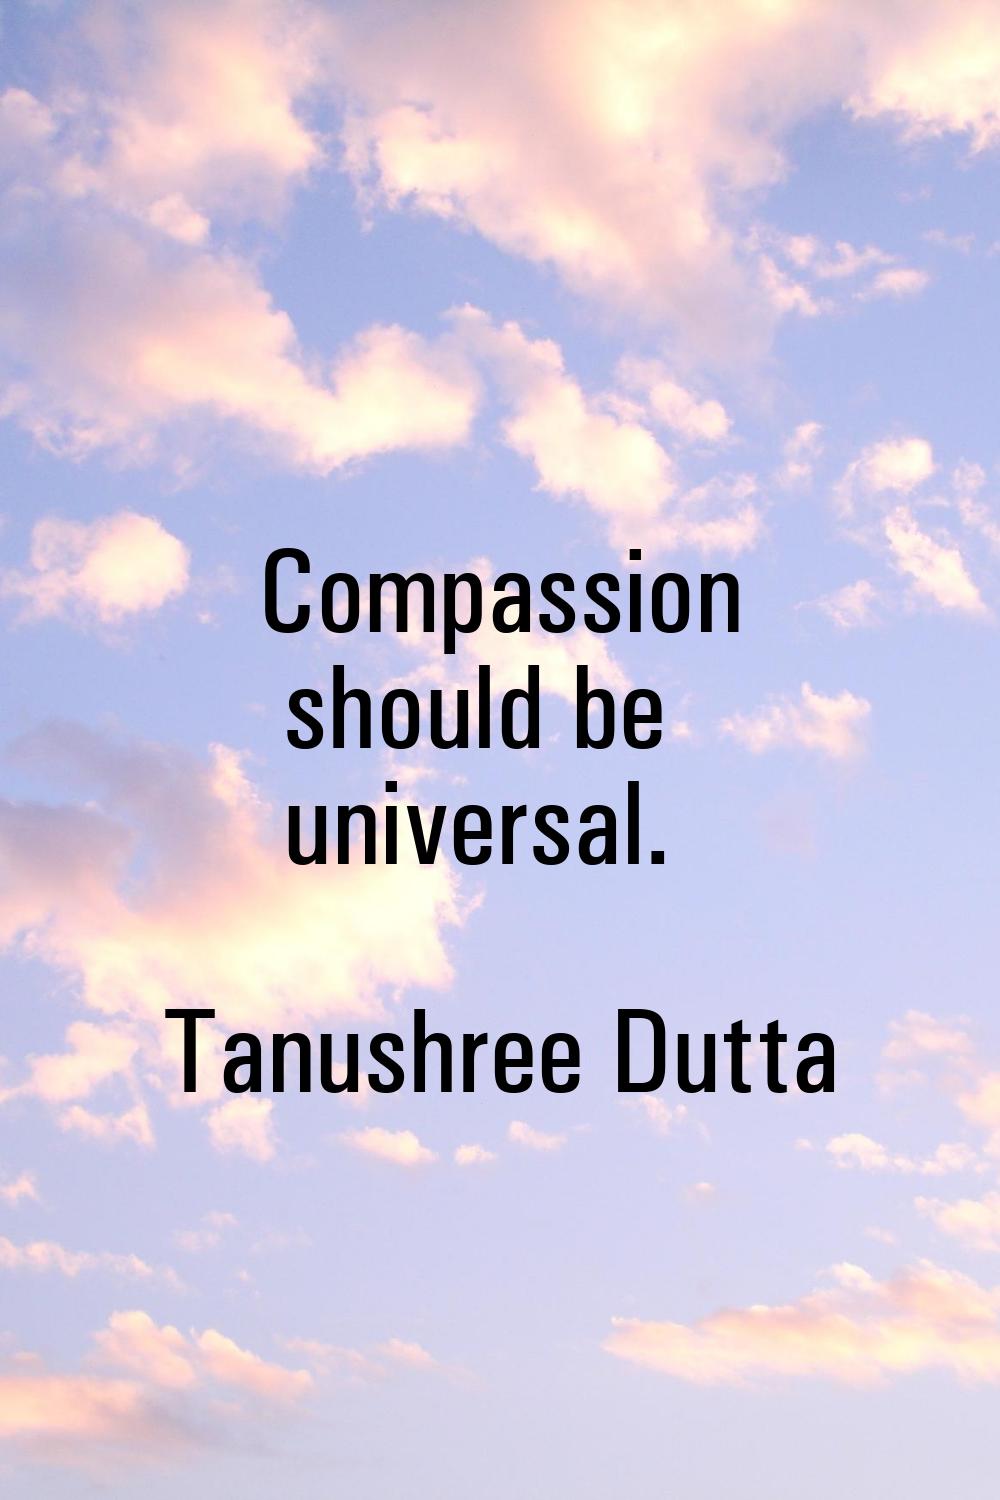 Compassion should be universal.